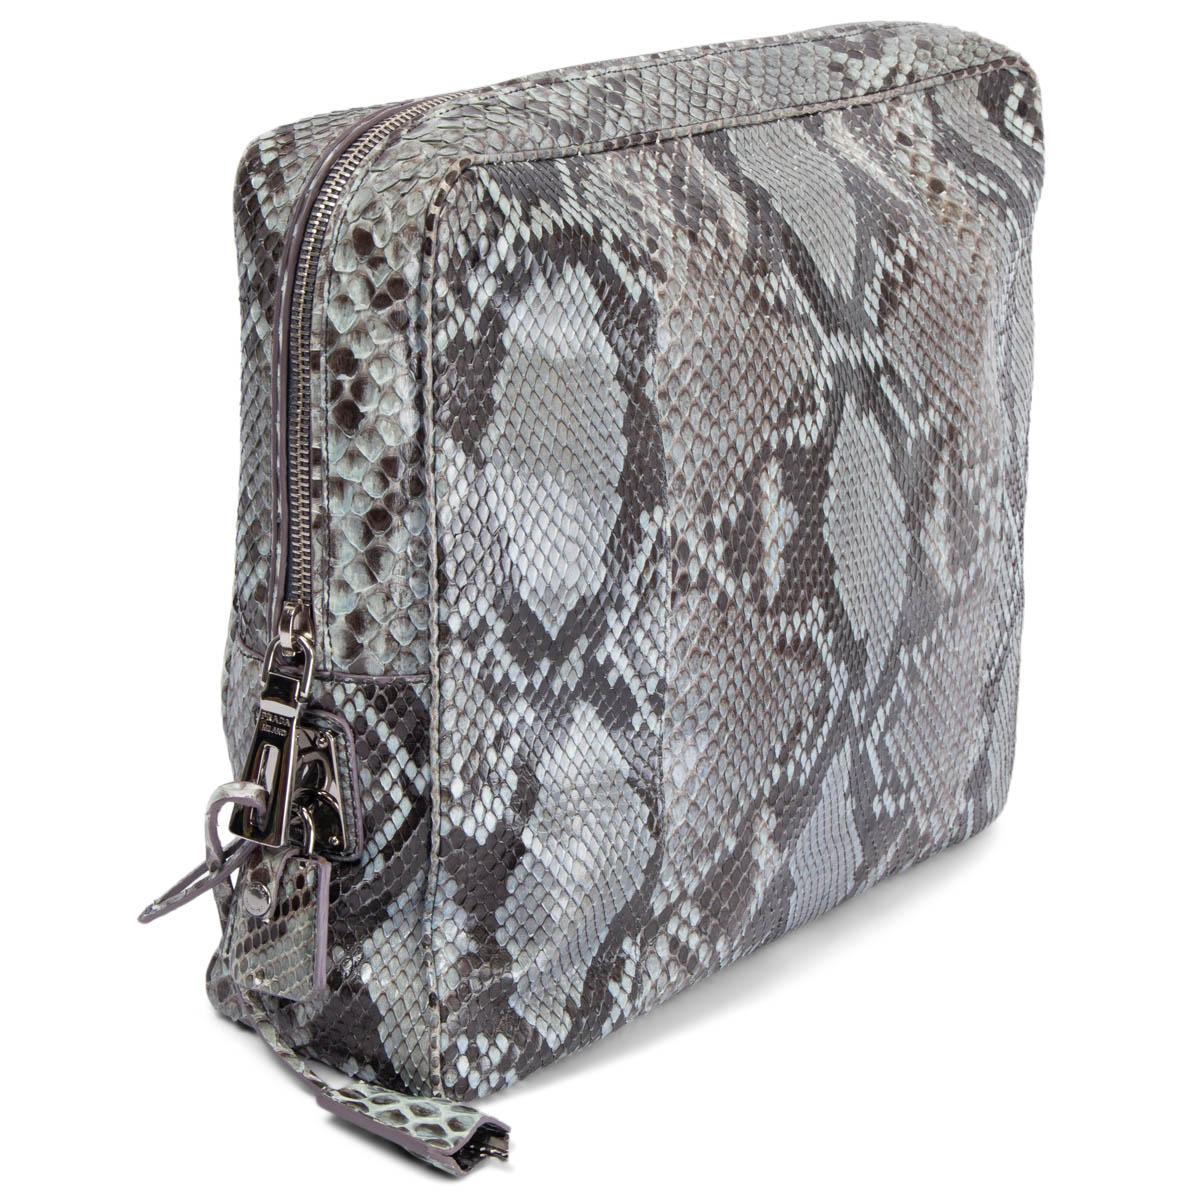 100% authentic Prada large clutch bag in grey and black python featuring silver-tone hardware. Opens with a zipper on top and is lined in nude smooth lambskin with one big zipper pocket against the back and two open pockets against the front. Has